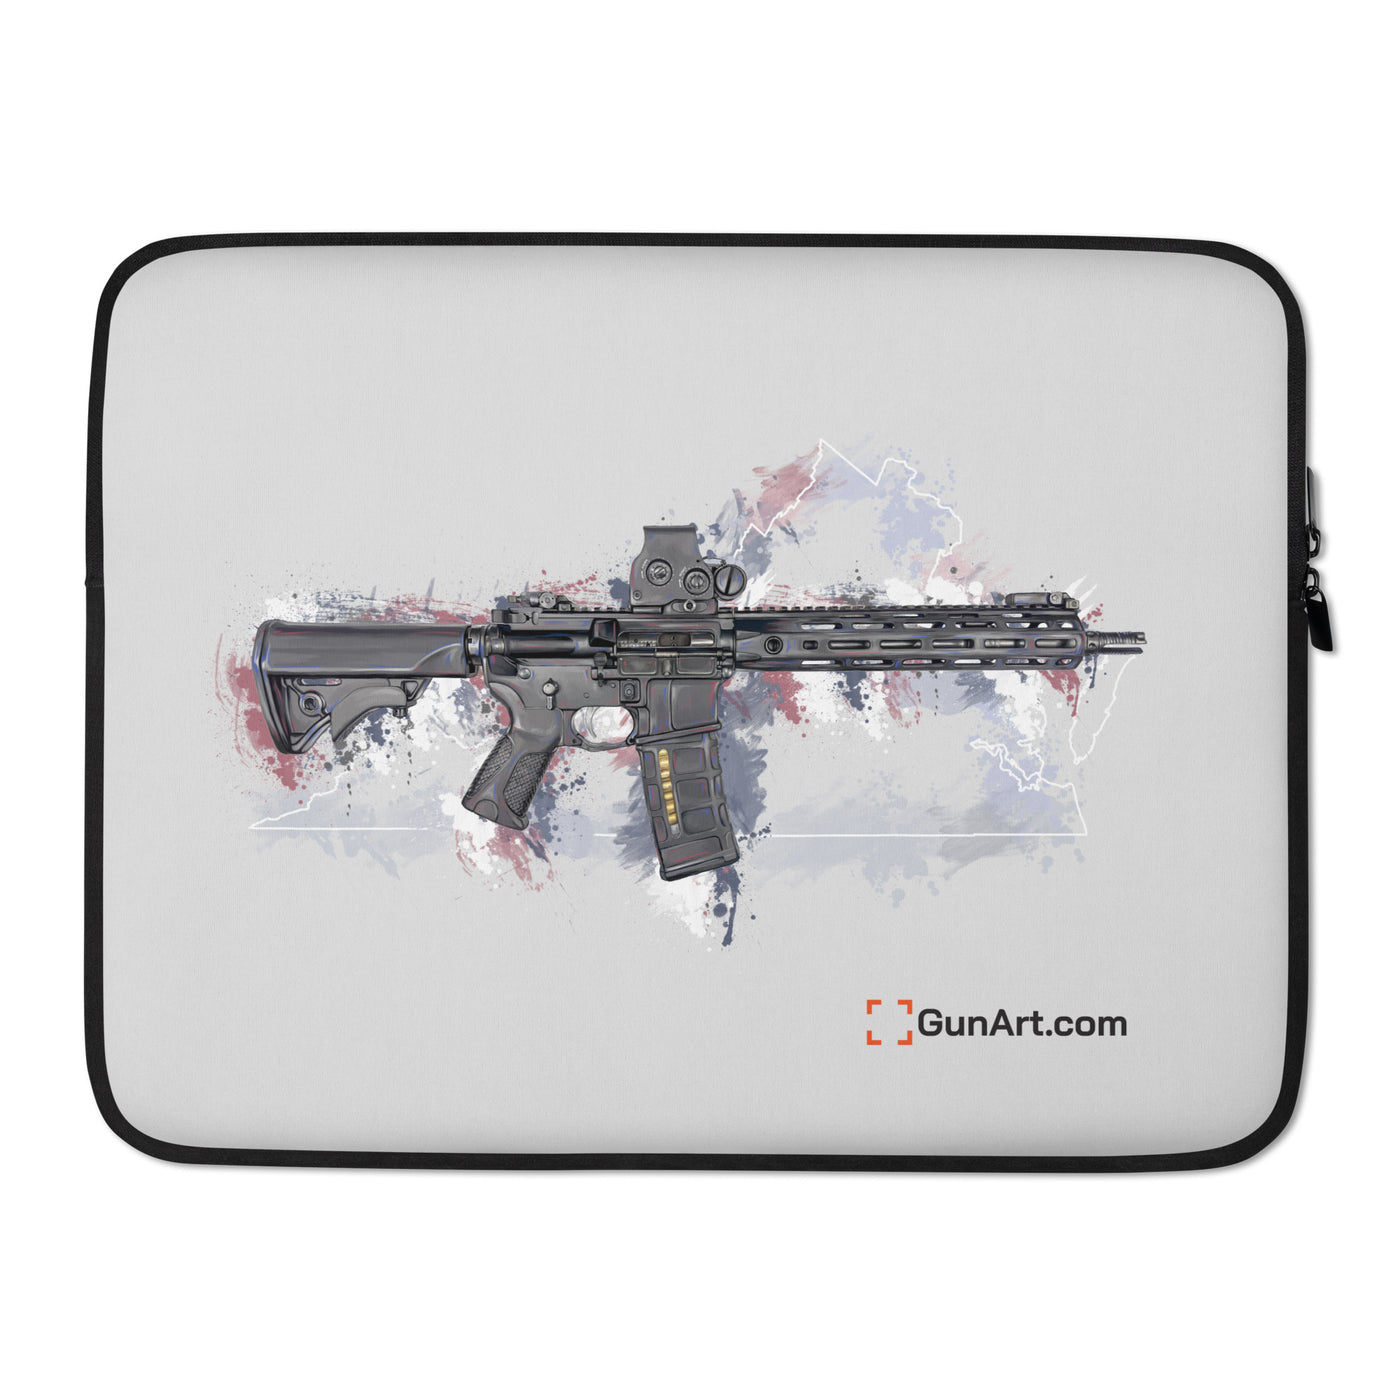 Defending Freedom - Virginia - AR-15 State Laptop Sleeve - White State